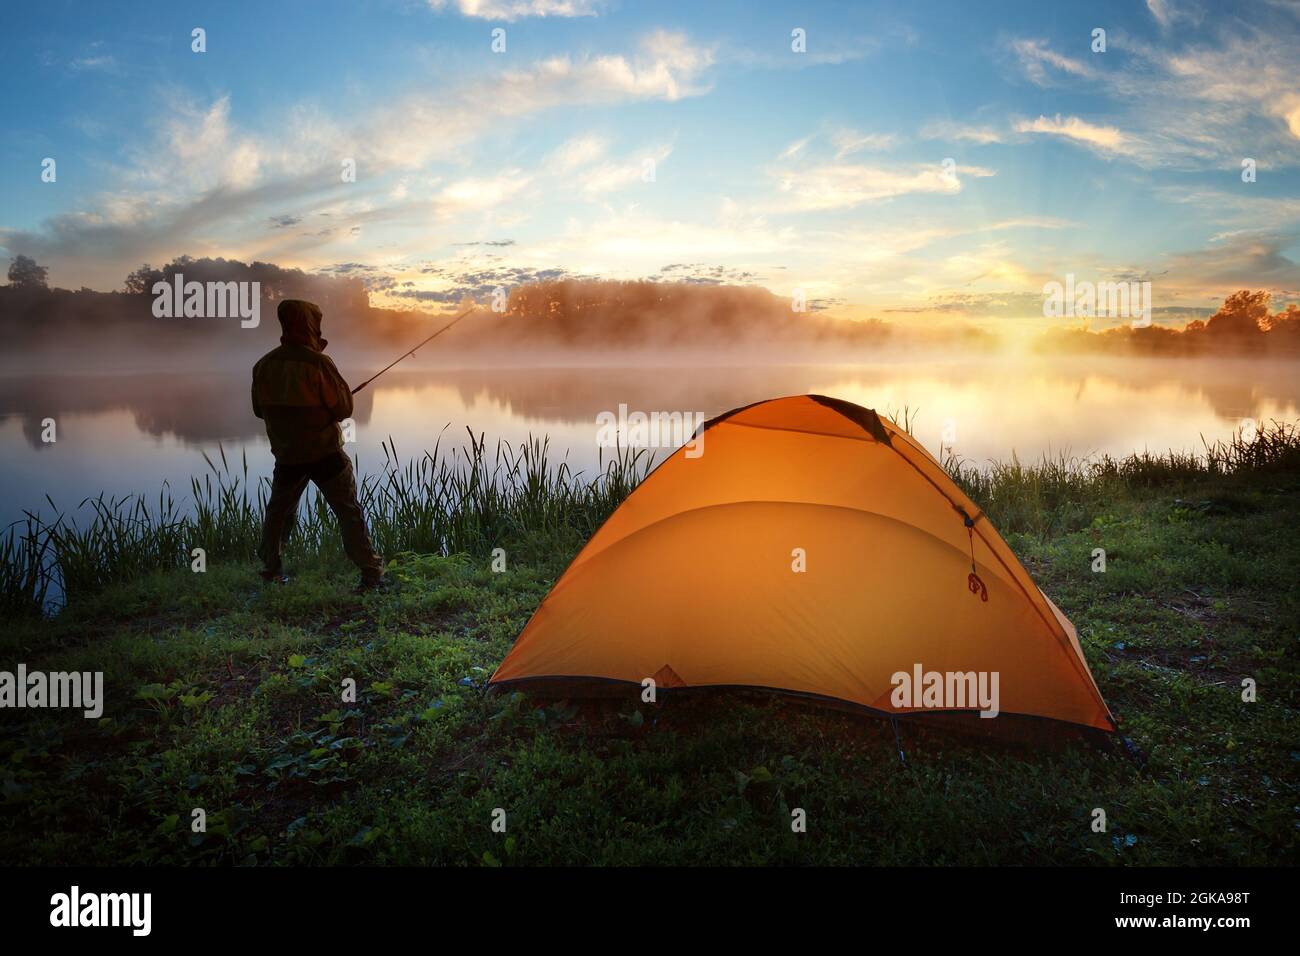 Fisherman near an orange tent on bank of misty river at sunset Stock Photo